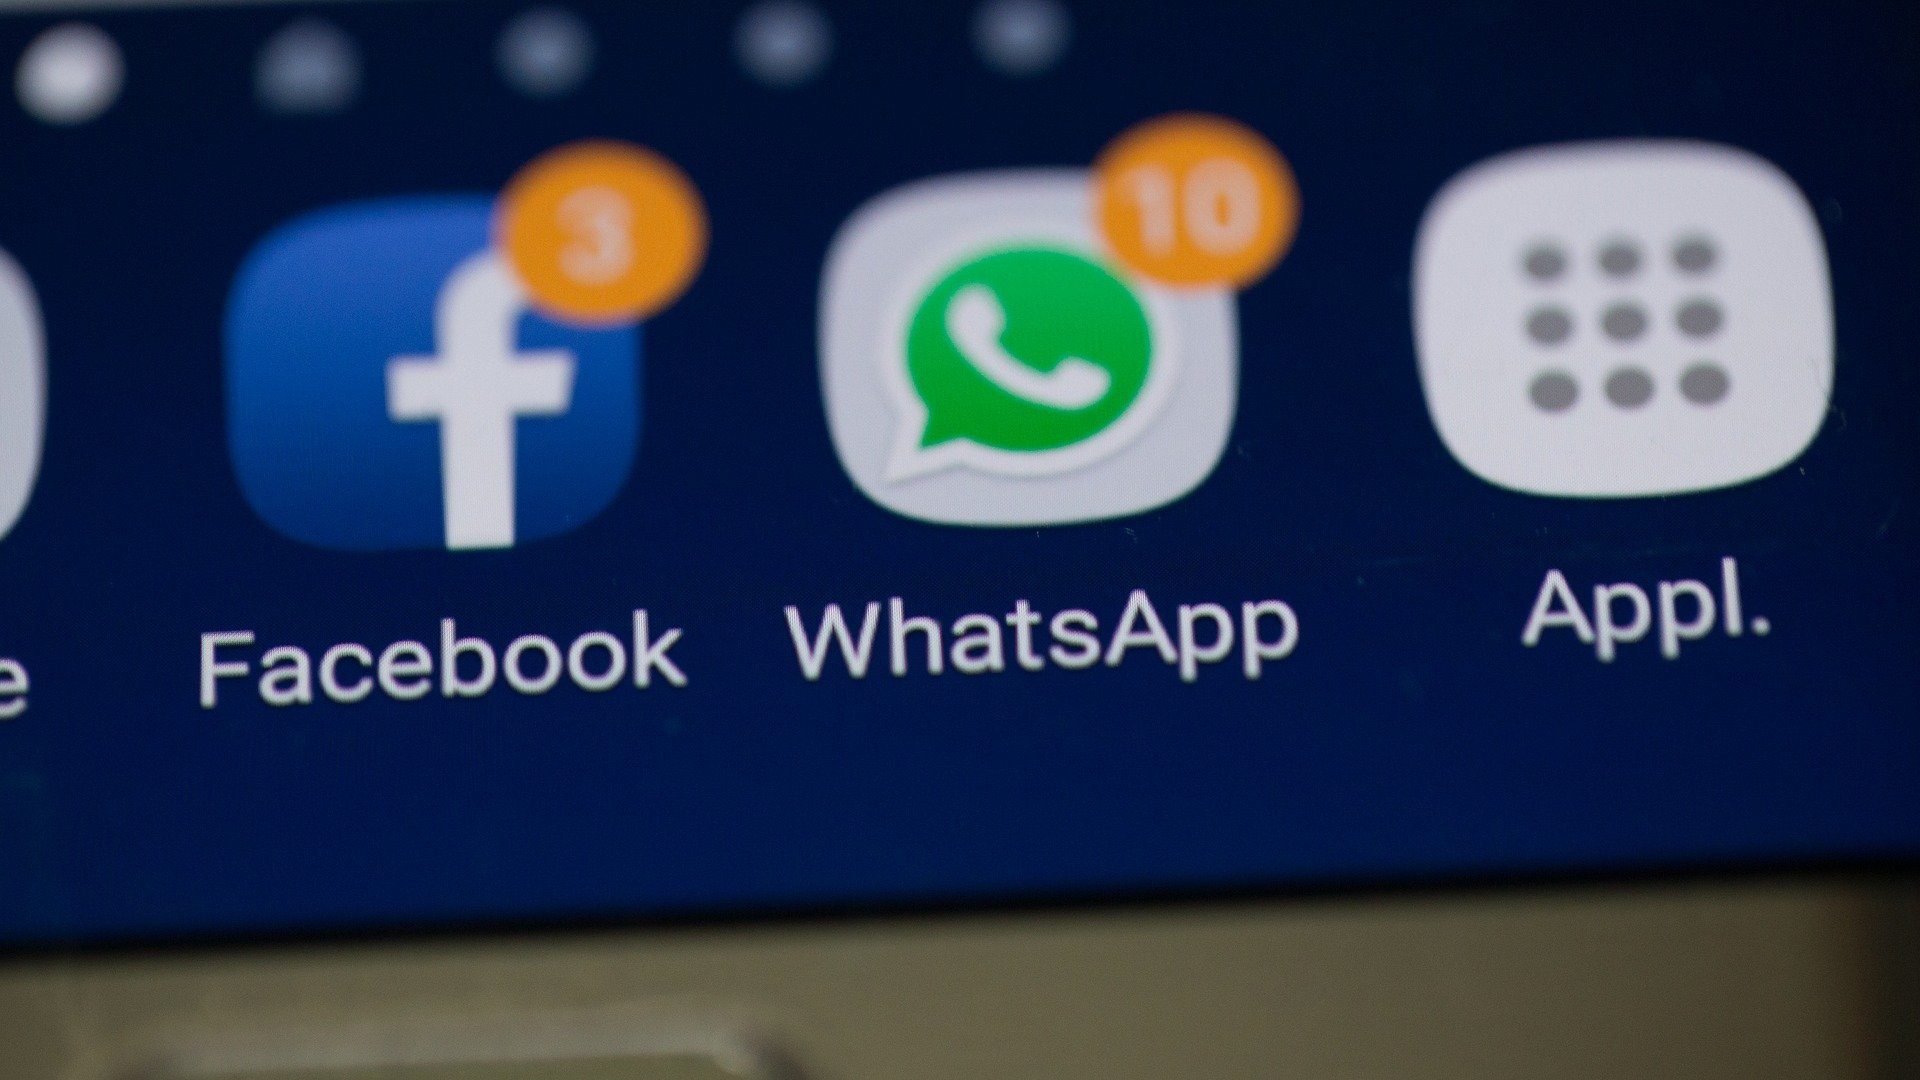 WhatsApp Privacy Changes Roil Users, Governments